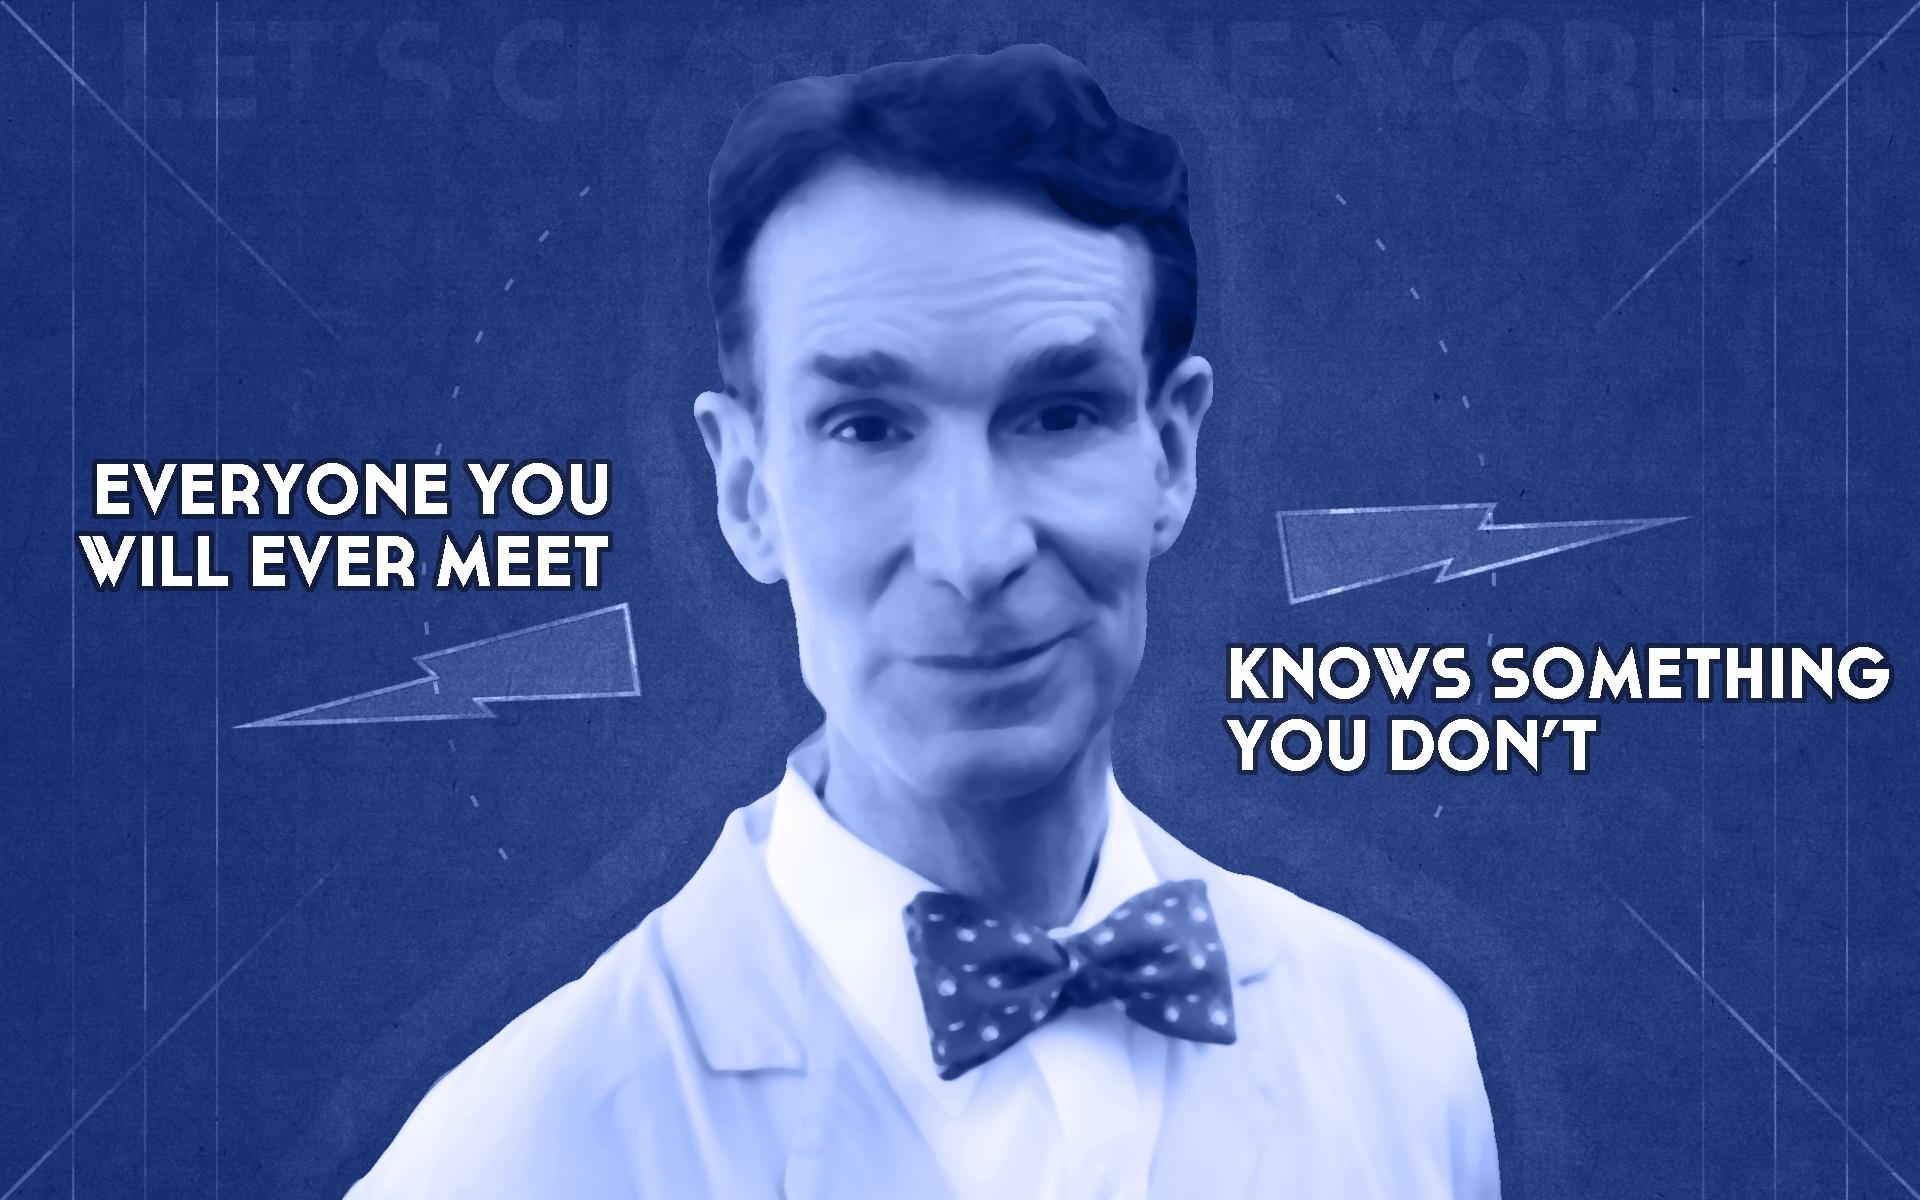 Bill Nye's quote